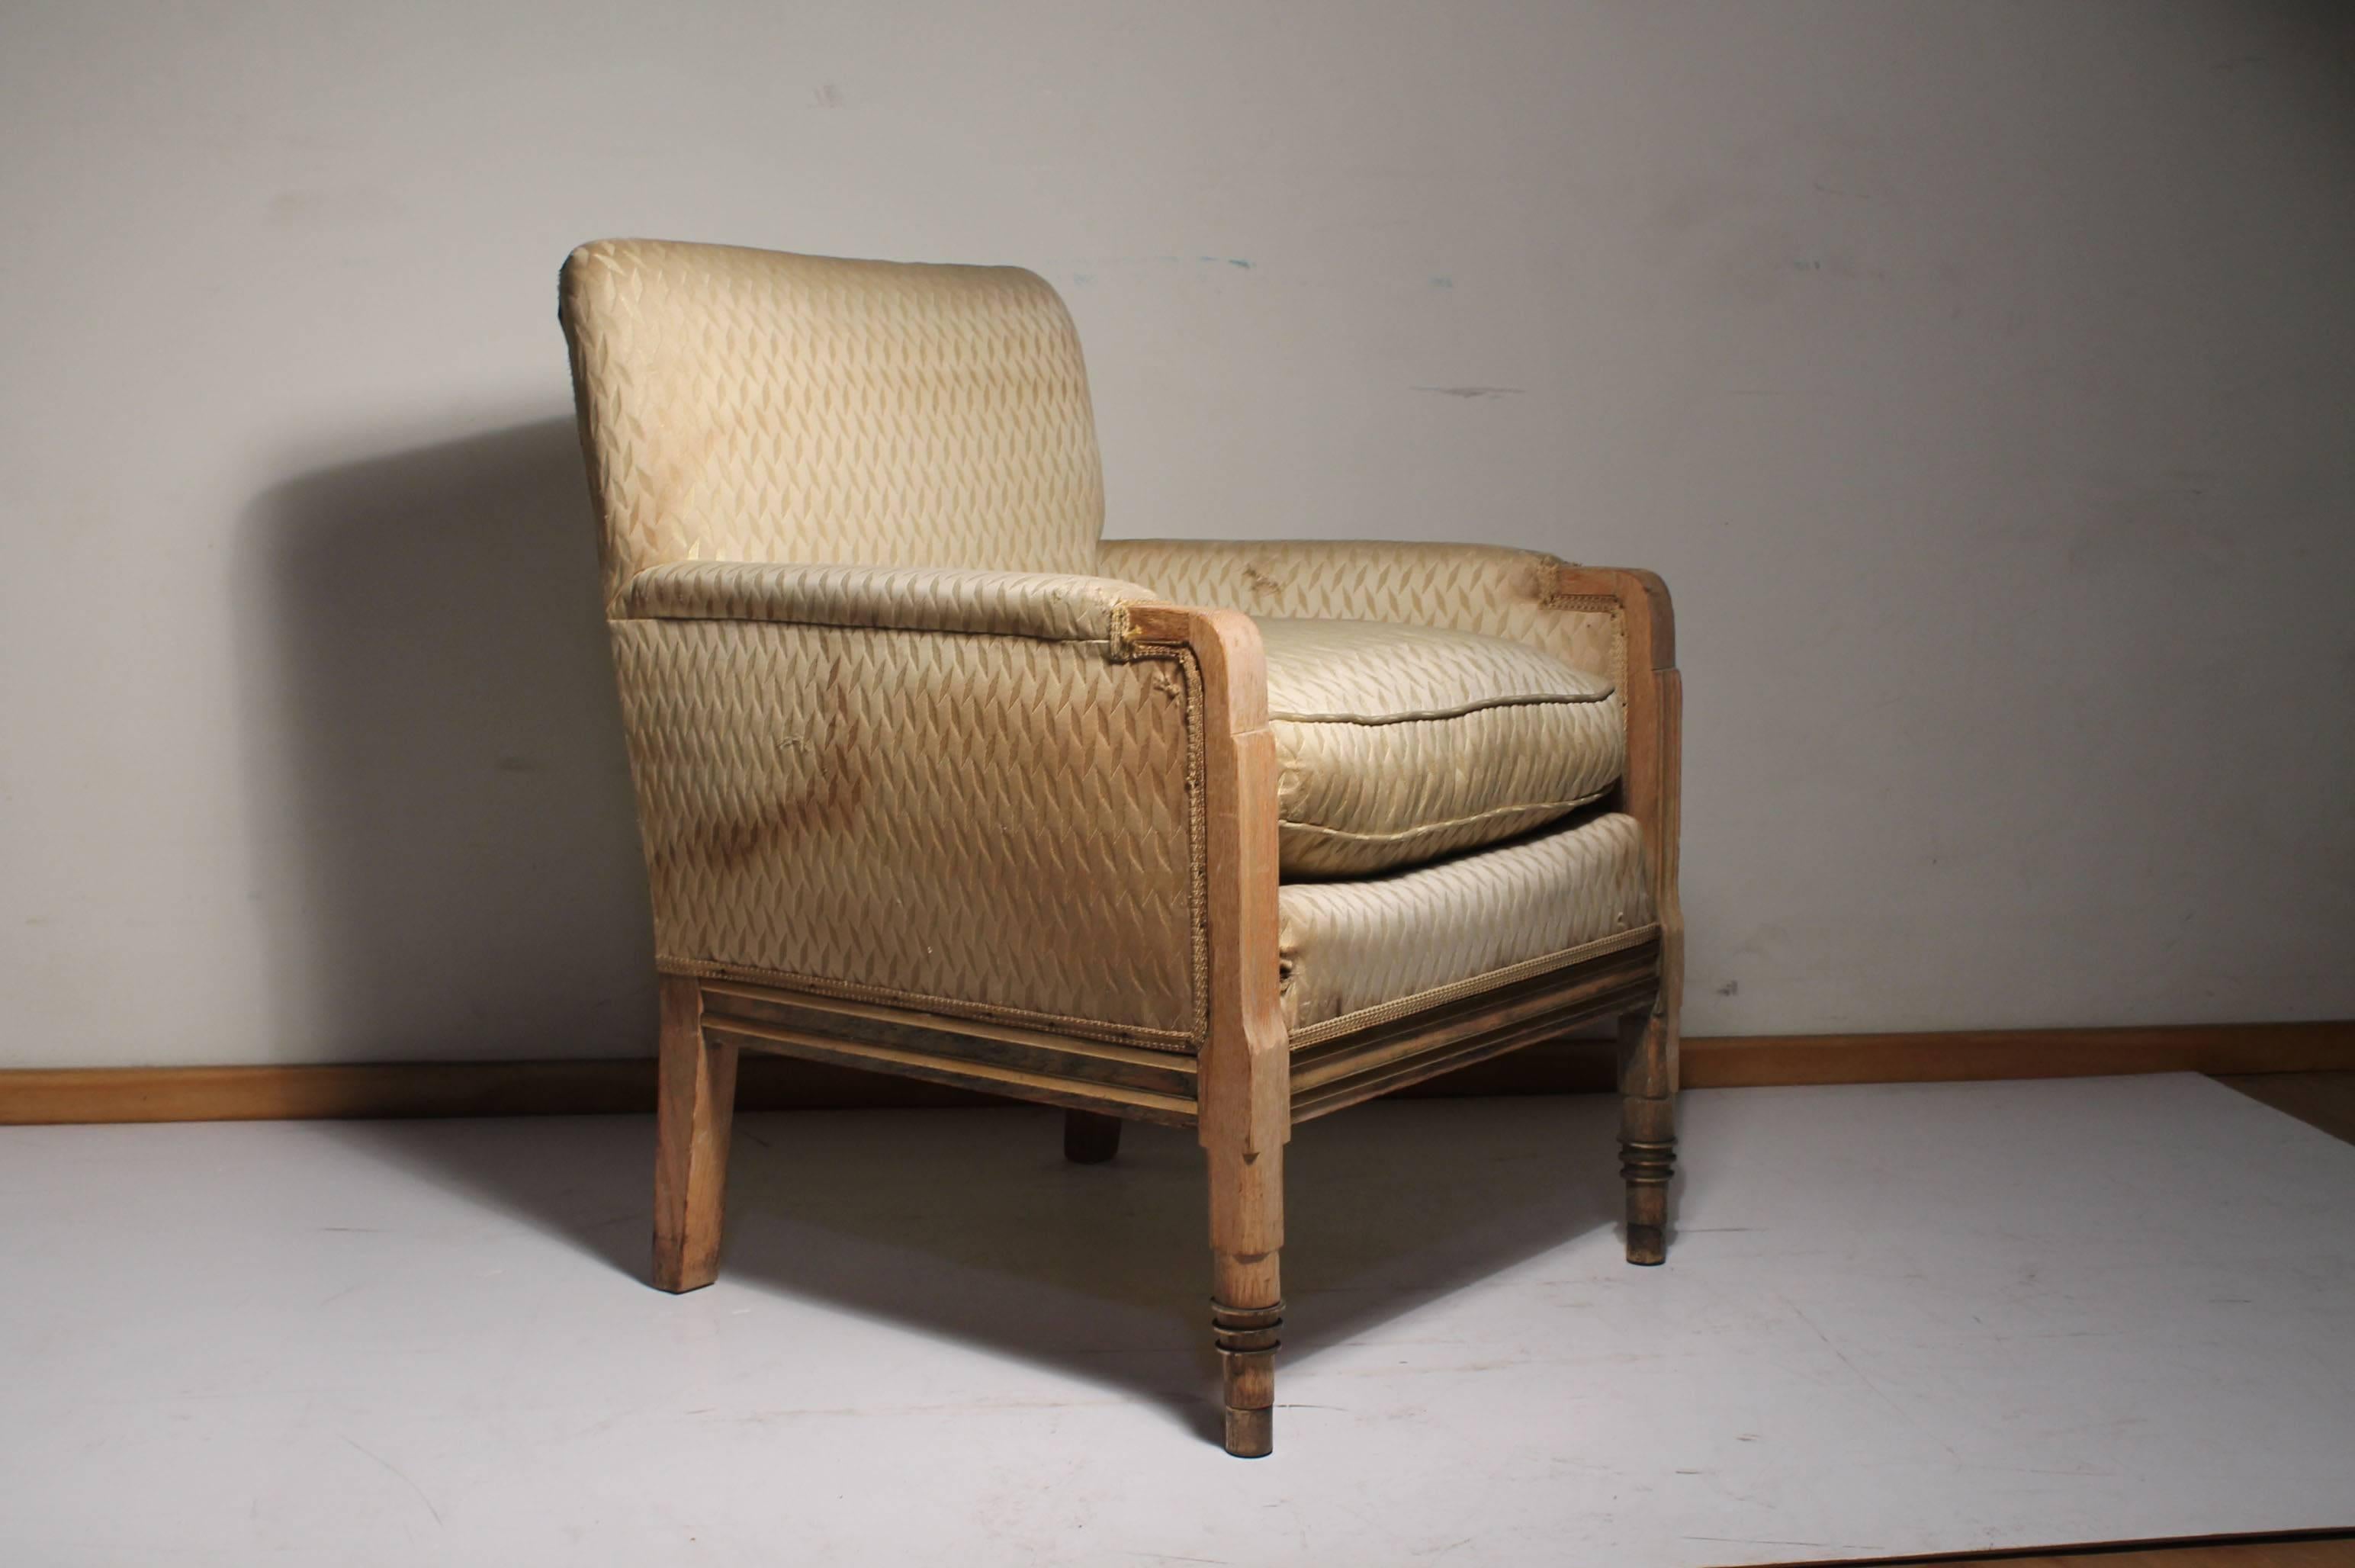 Completely period club chair. Either French or American deco. In the style Kem Weber, Gilbert Rohde, Walter Von Nessen

Has beautiful hardware details. ribbed on the side and front. Front legs have concentric metal rings on the feet with metal